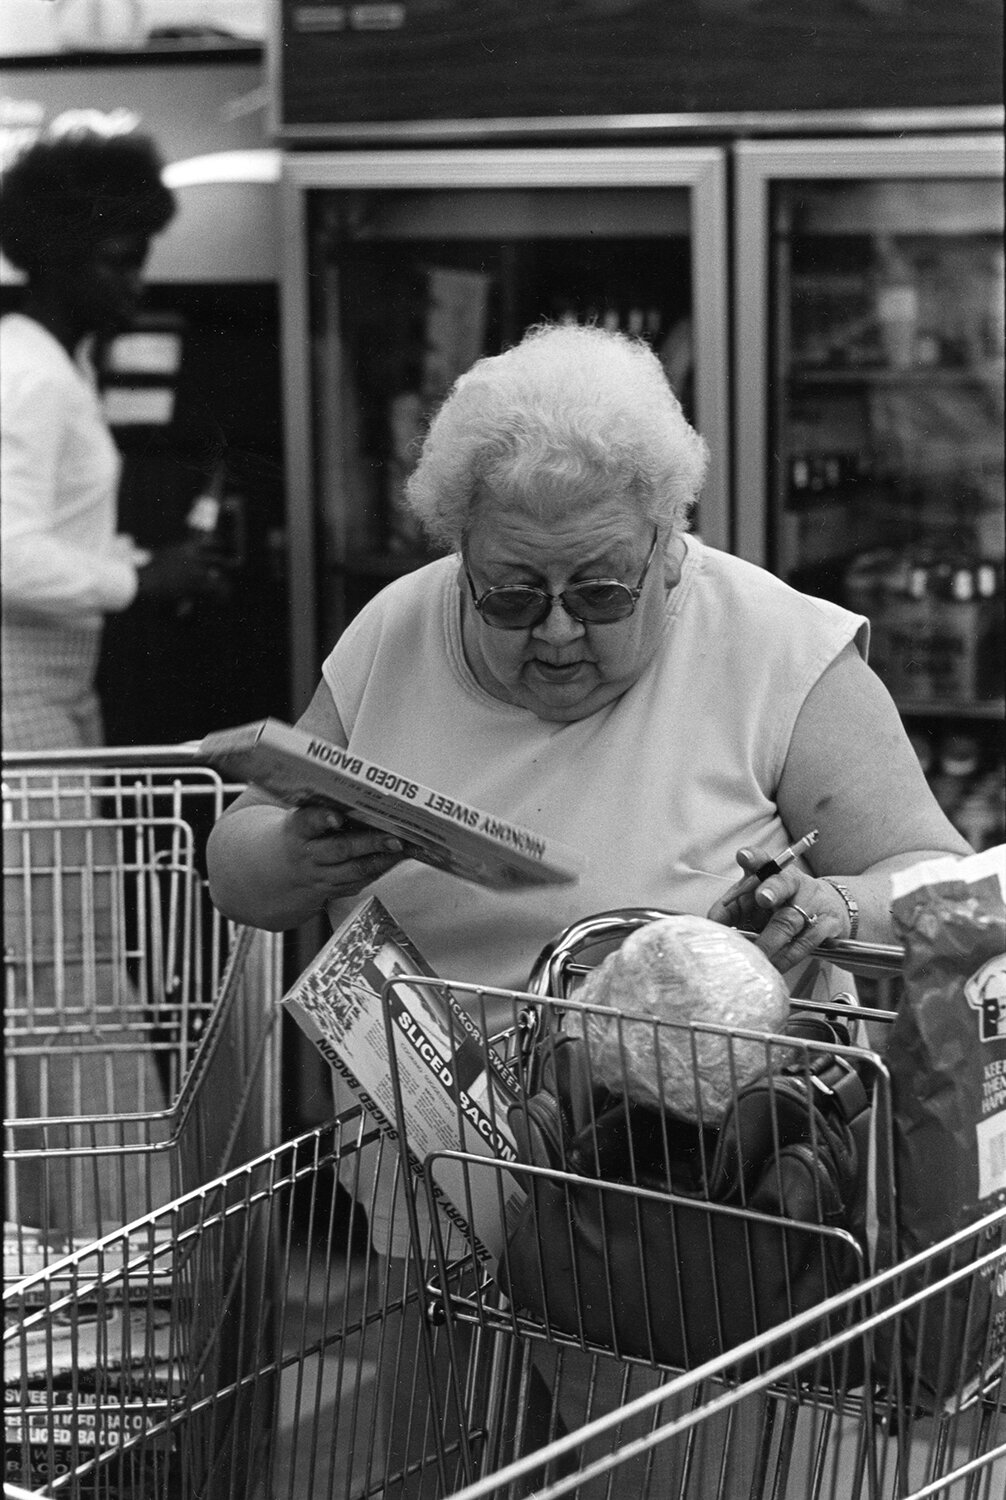   Grocery Store , 1980 Silver Gelatin Print 14 x 11 in. (paper size) The Do Good Fund, Inc., 2017-62 